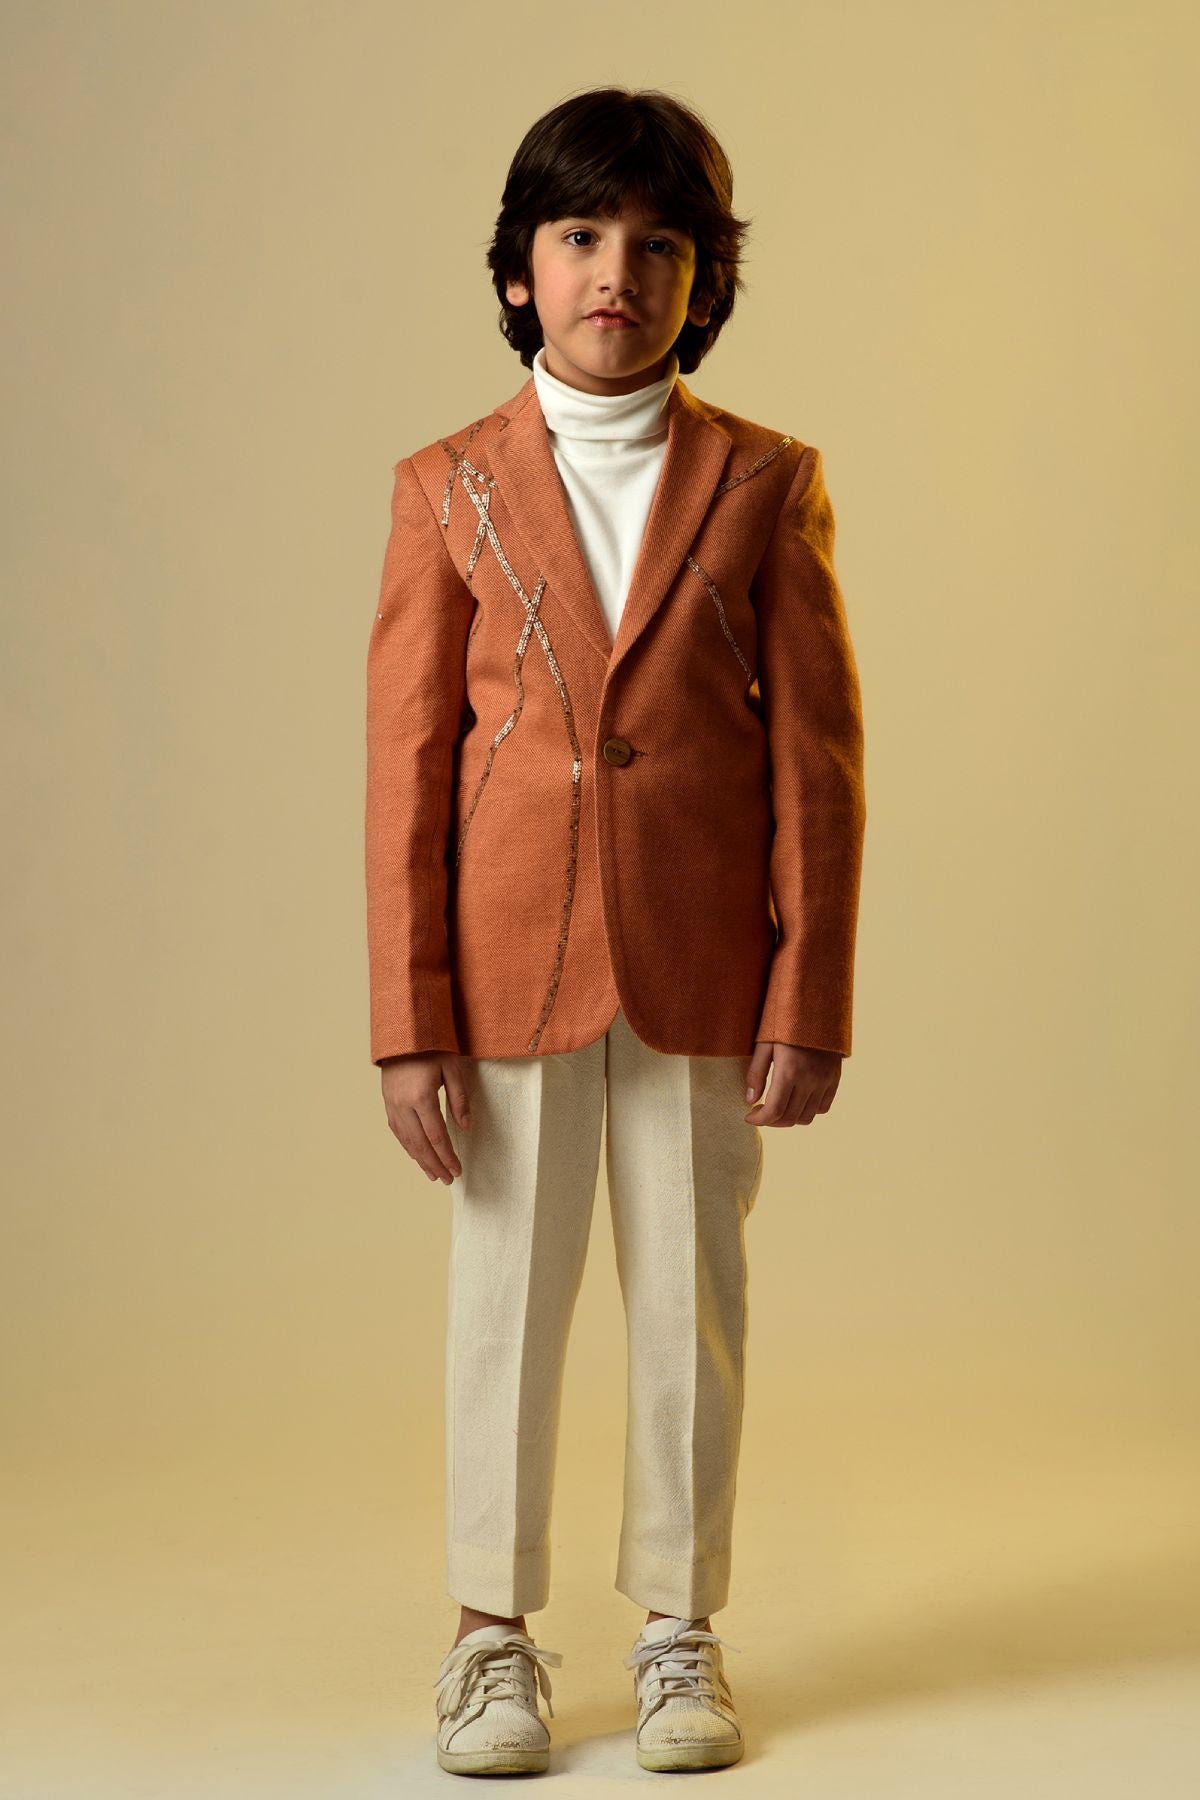 Buy Kids Designer Littleens Blazer jacket with tailored fit made from lightweight organic wool twill Online at ScrollnShops